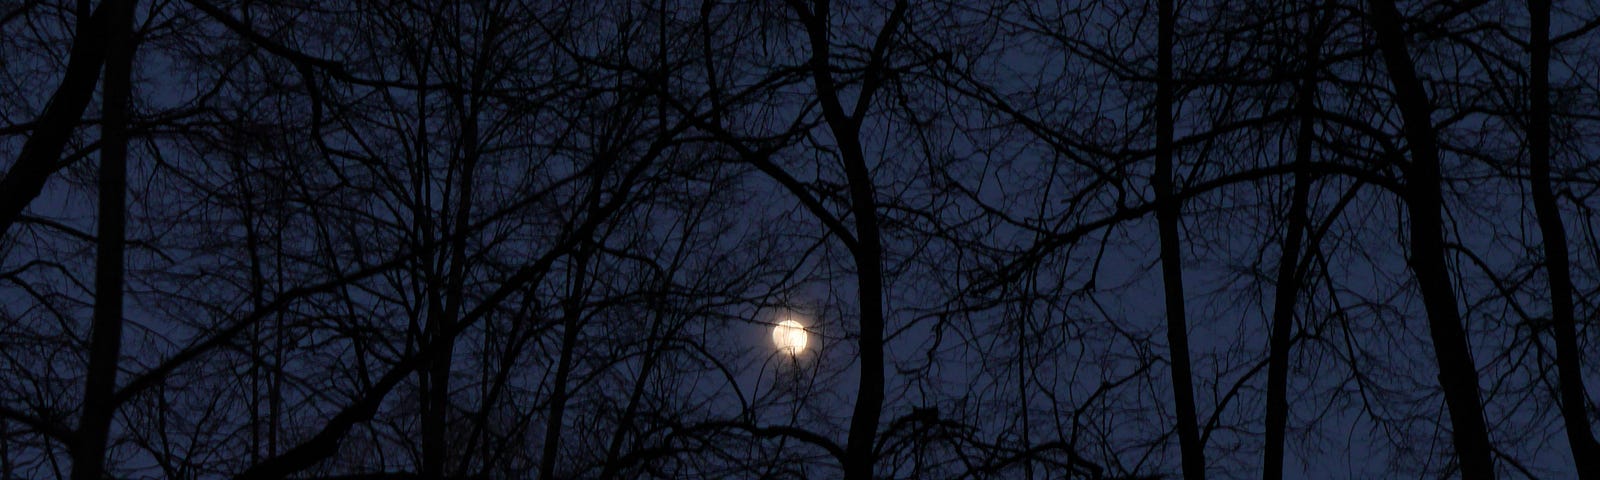 Moon in trees branches at night